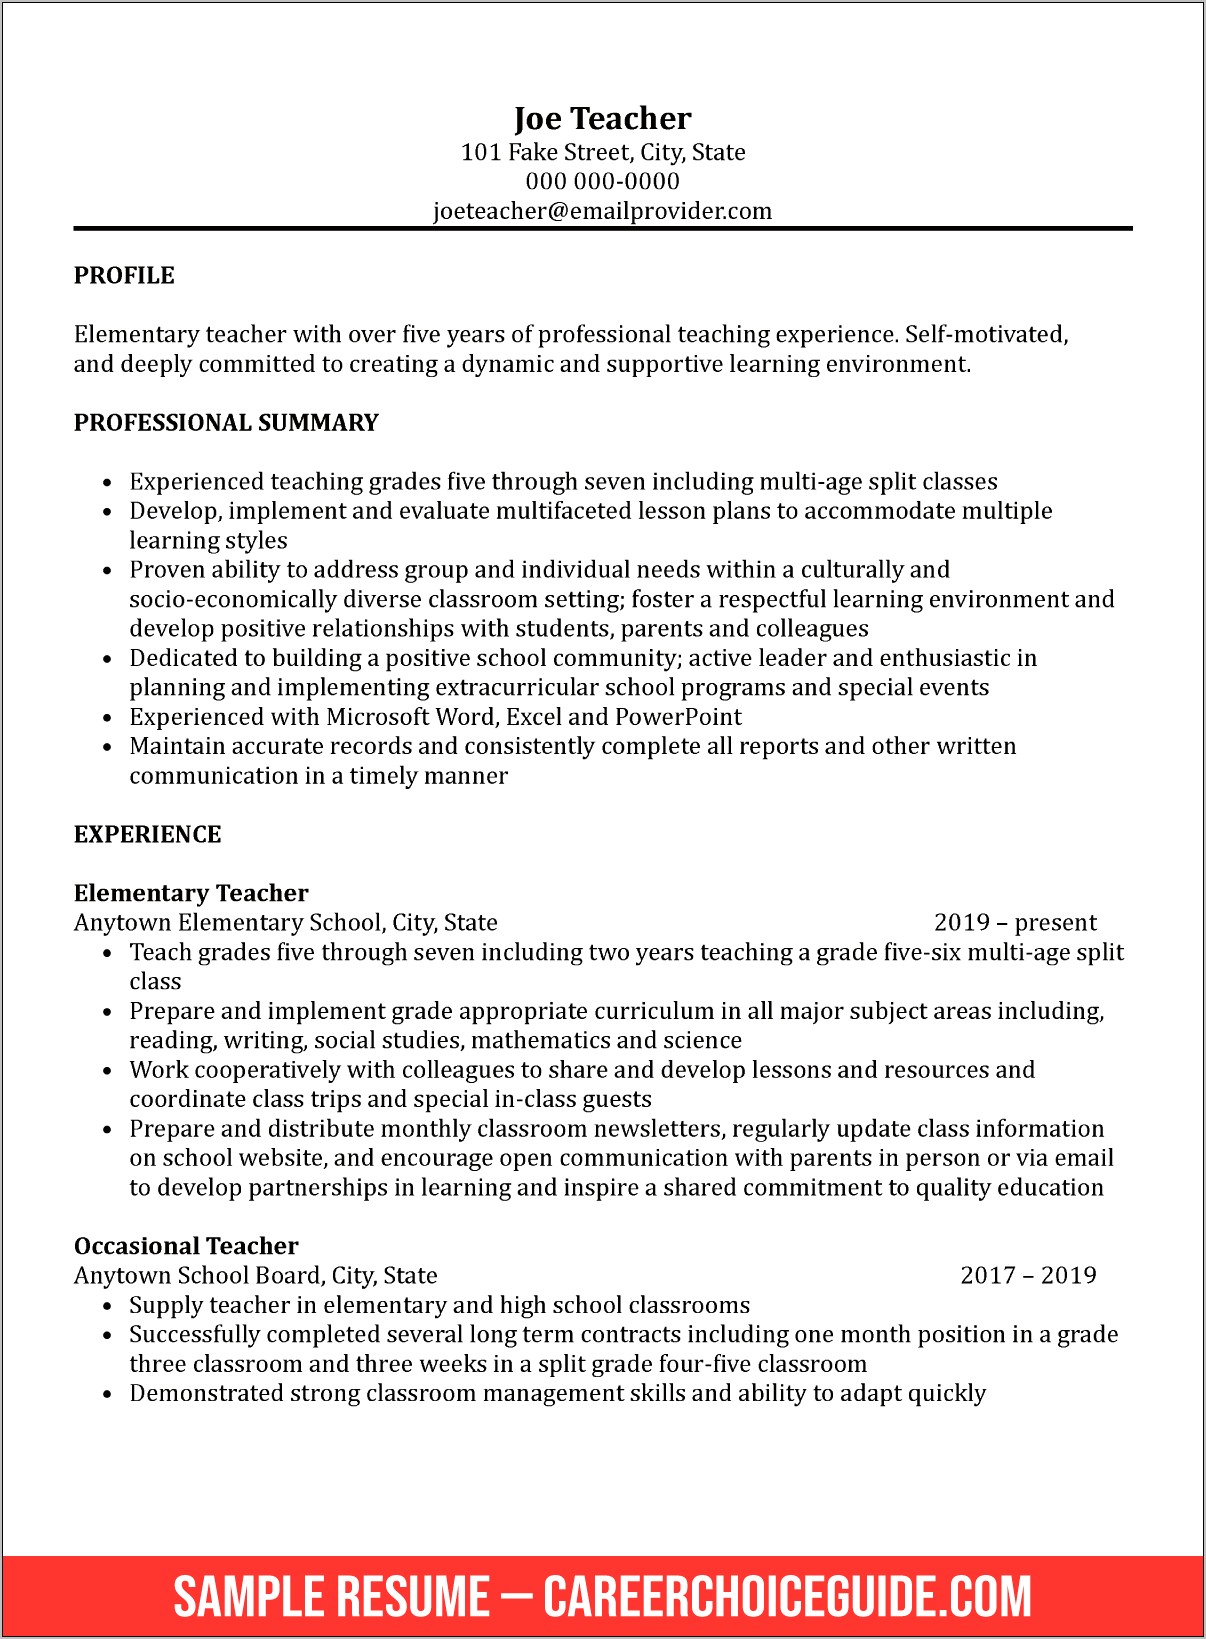 Samples Of Resumes With Education